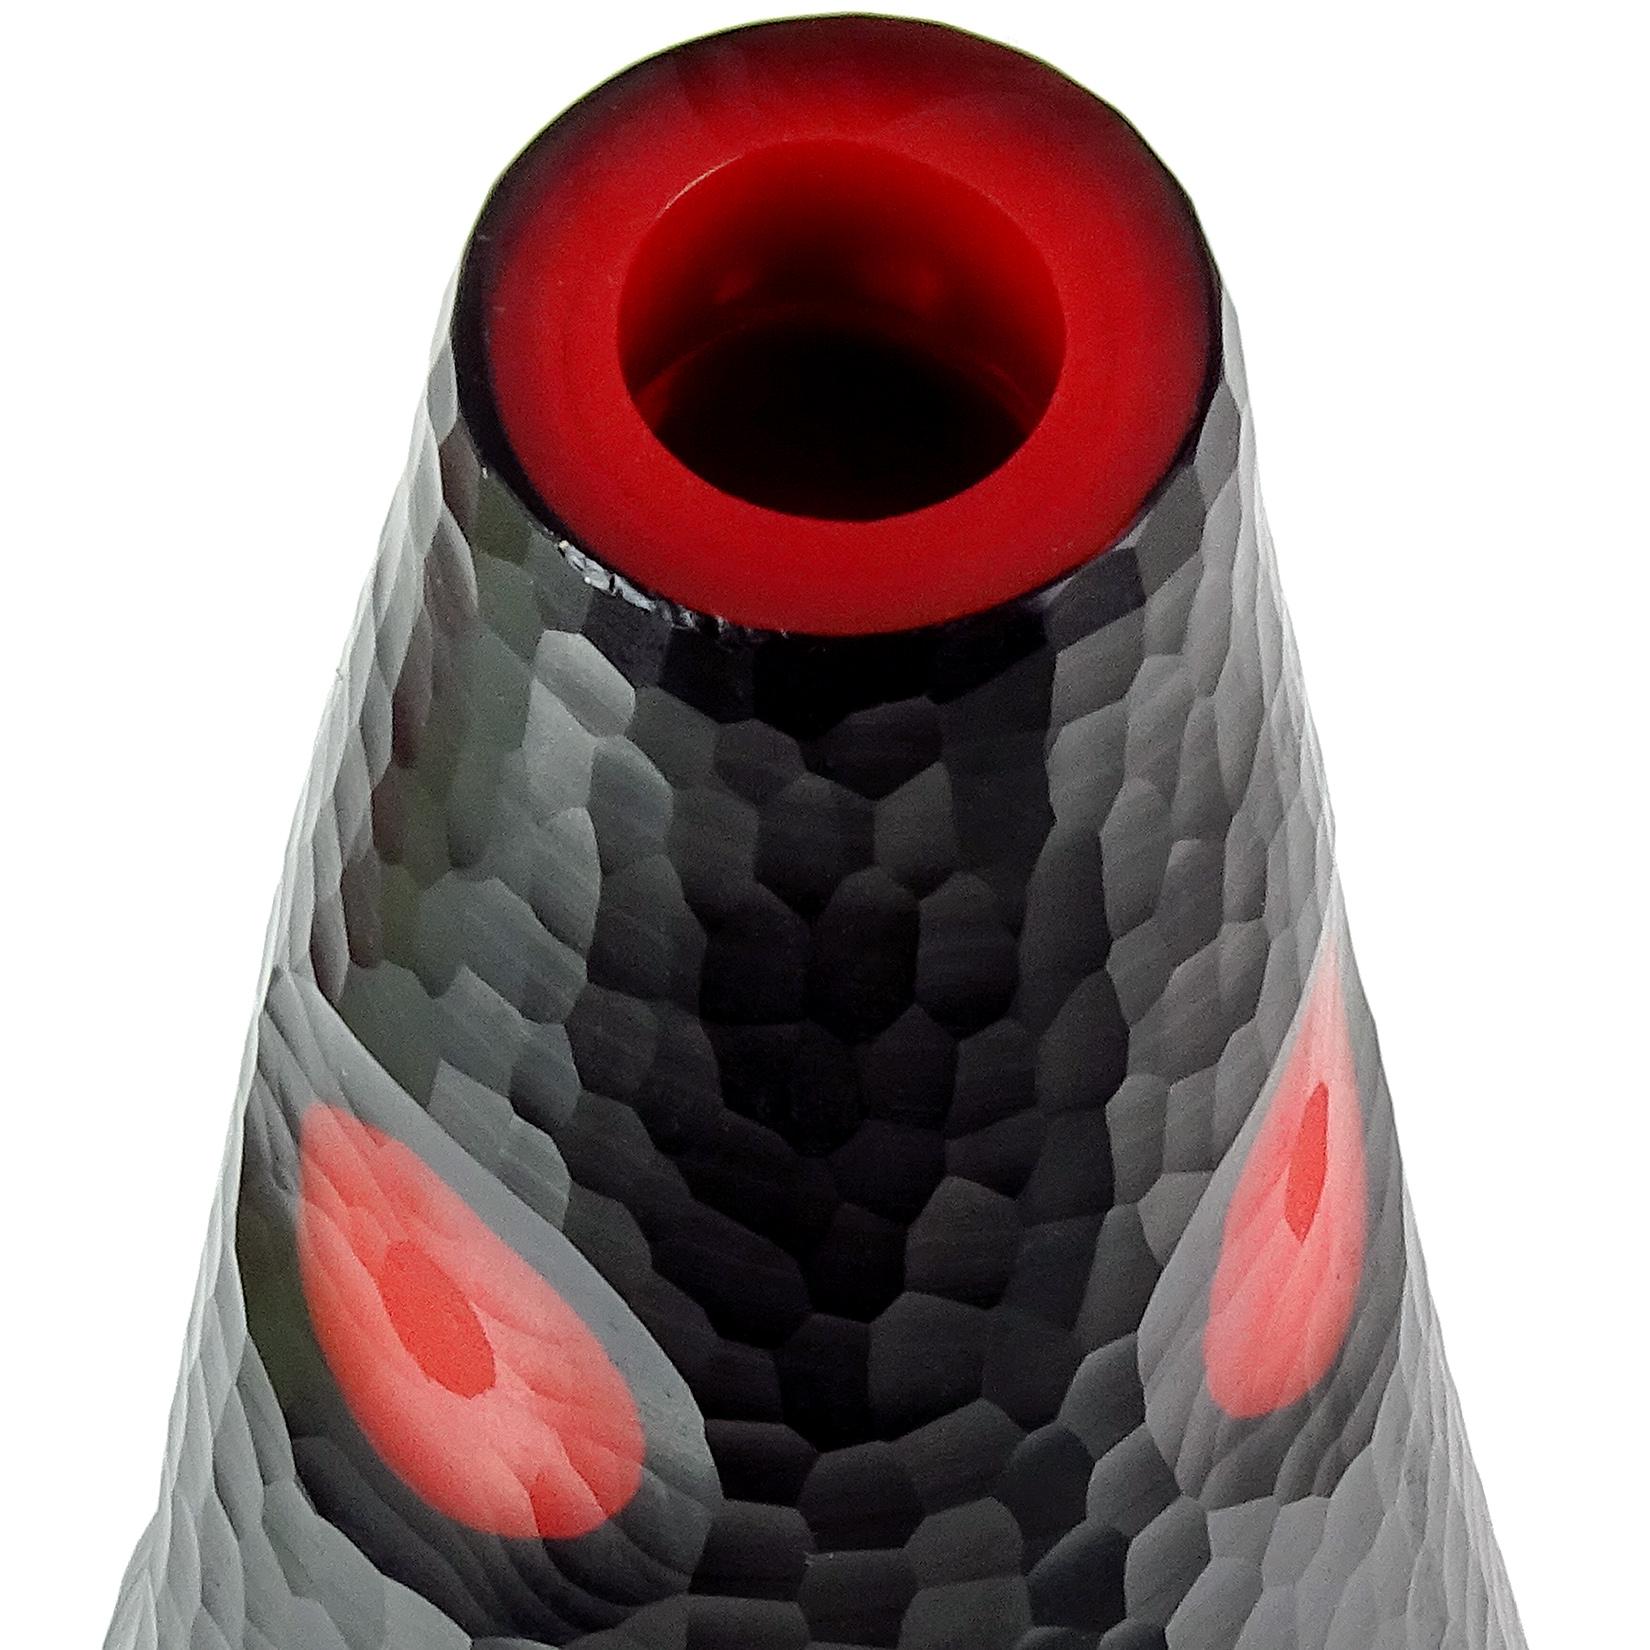 Beautiful Murano hand blown black over red core Italian art glass sculptural flower vase with carved surface. Created in the manner of the Venini company. The piece has carved circles, showing the red inside layer. Measures: 11 1/4